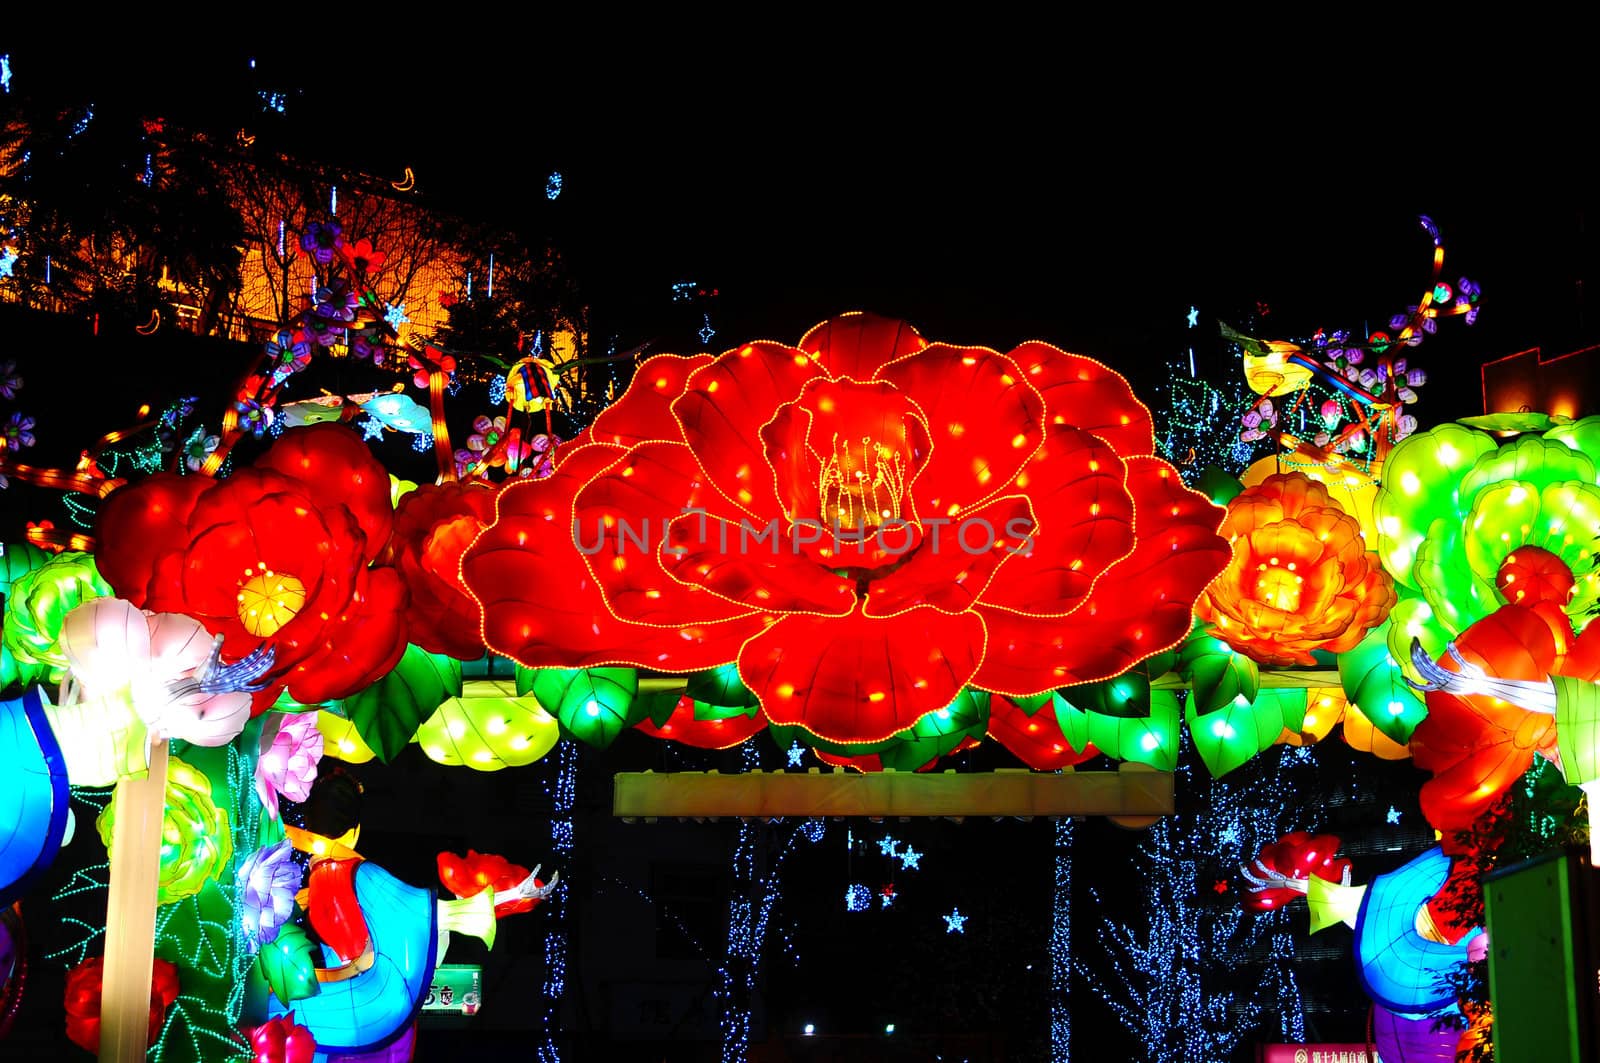 Traditional Chinese lanterns at the Lantern Festival